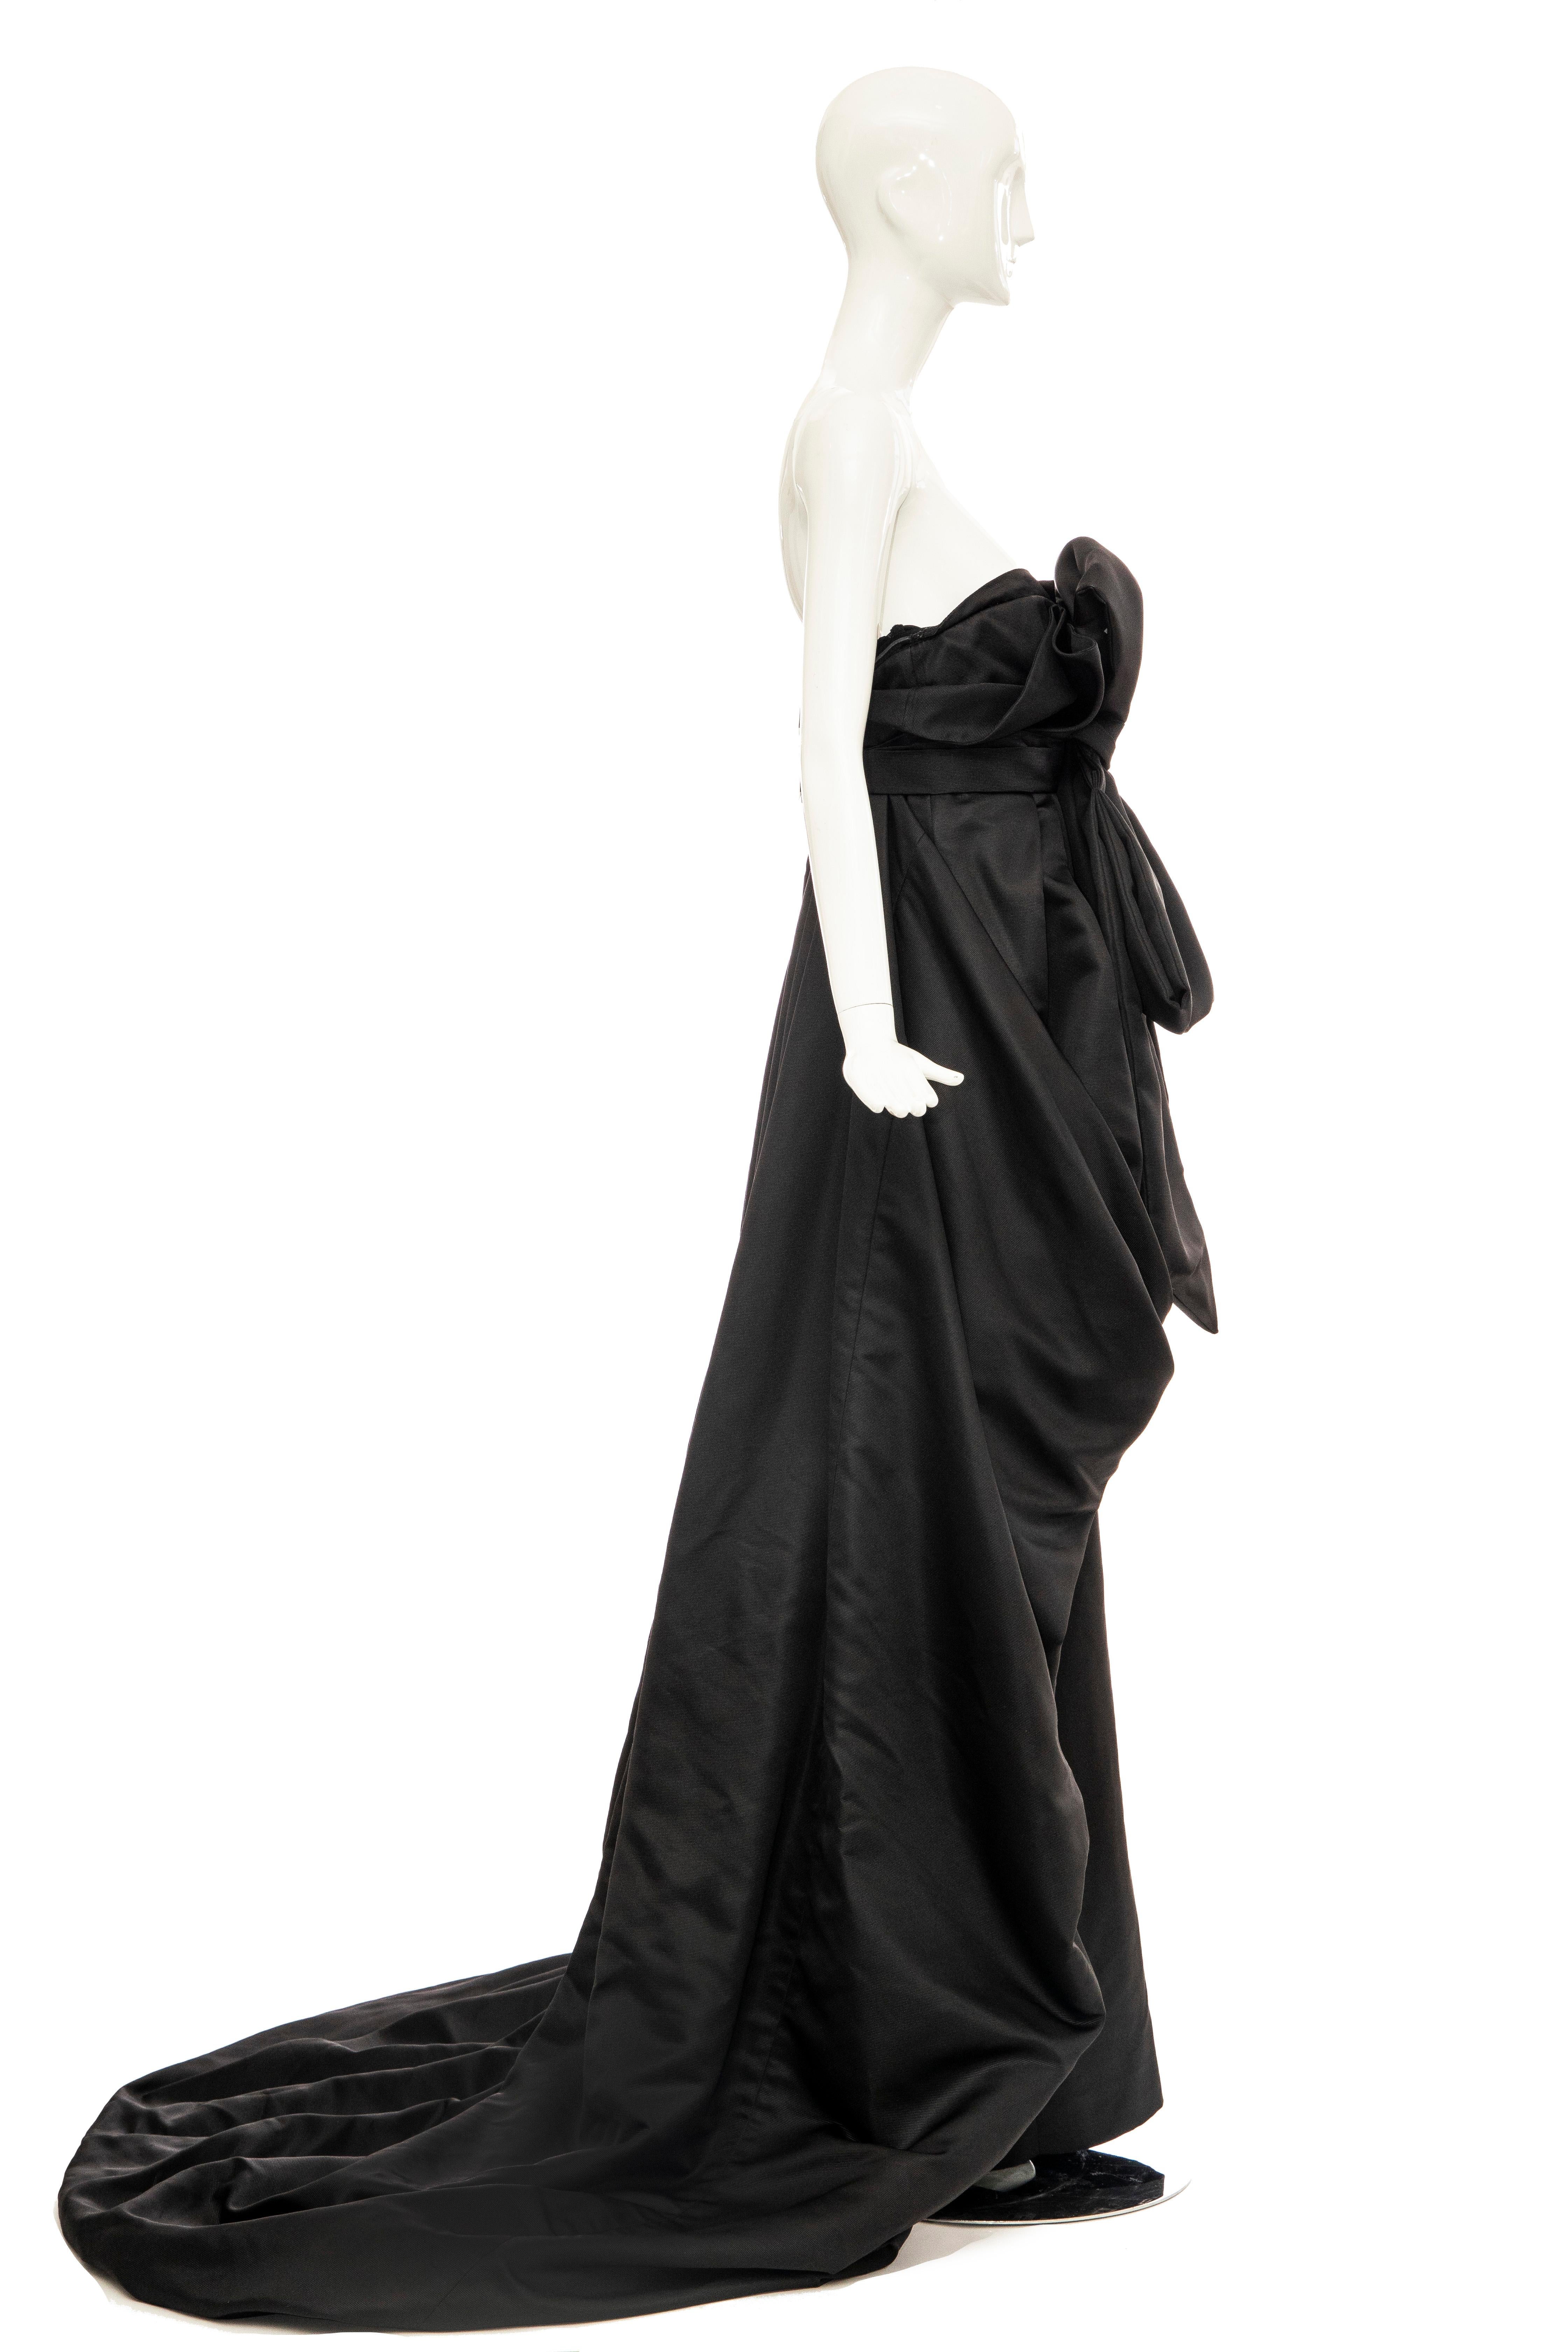 Women's Christian Dior by John Galliano Black Silk Strapless Gown, Fall 2008 For Sale